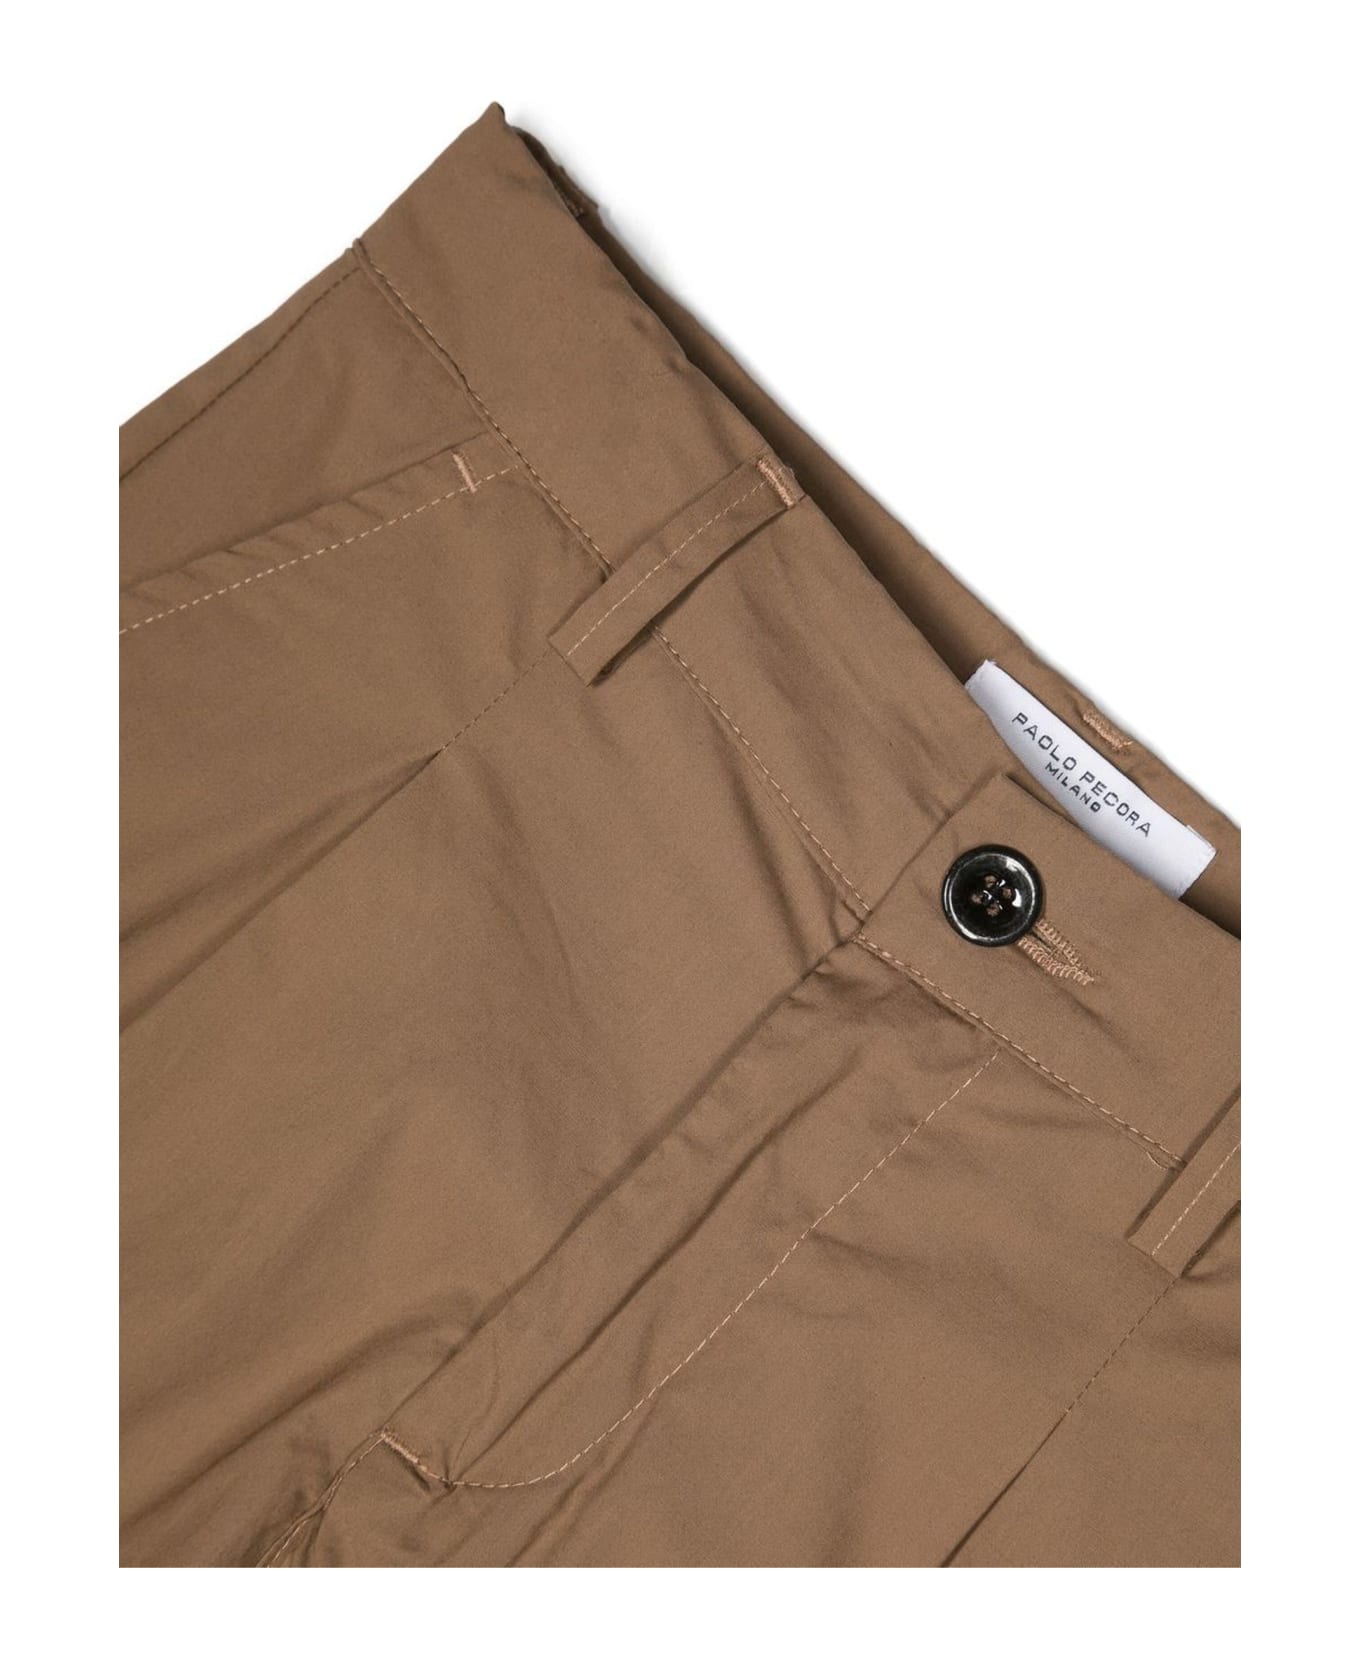 Paolo Pecora Shorts Brown - Brown ボトムス